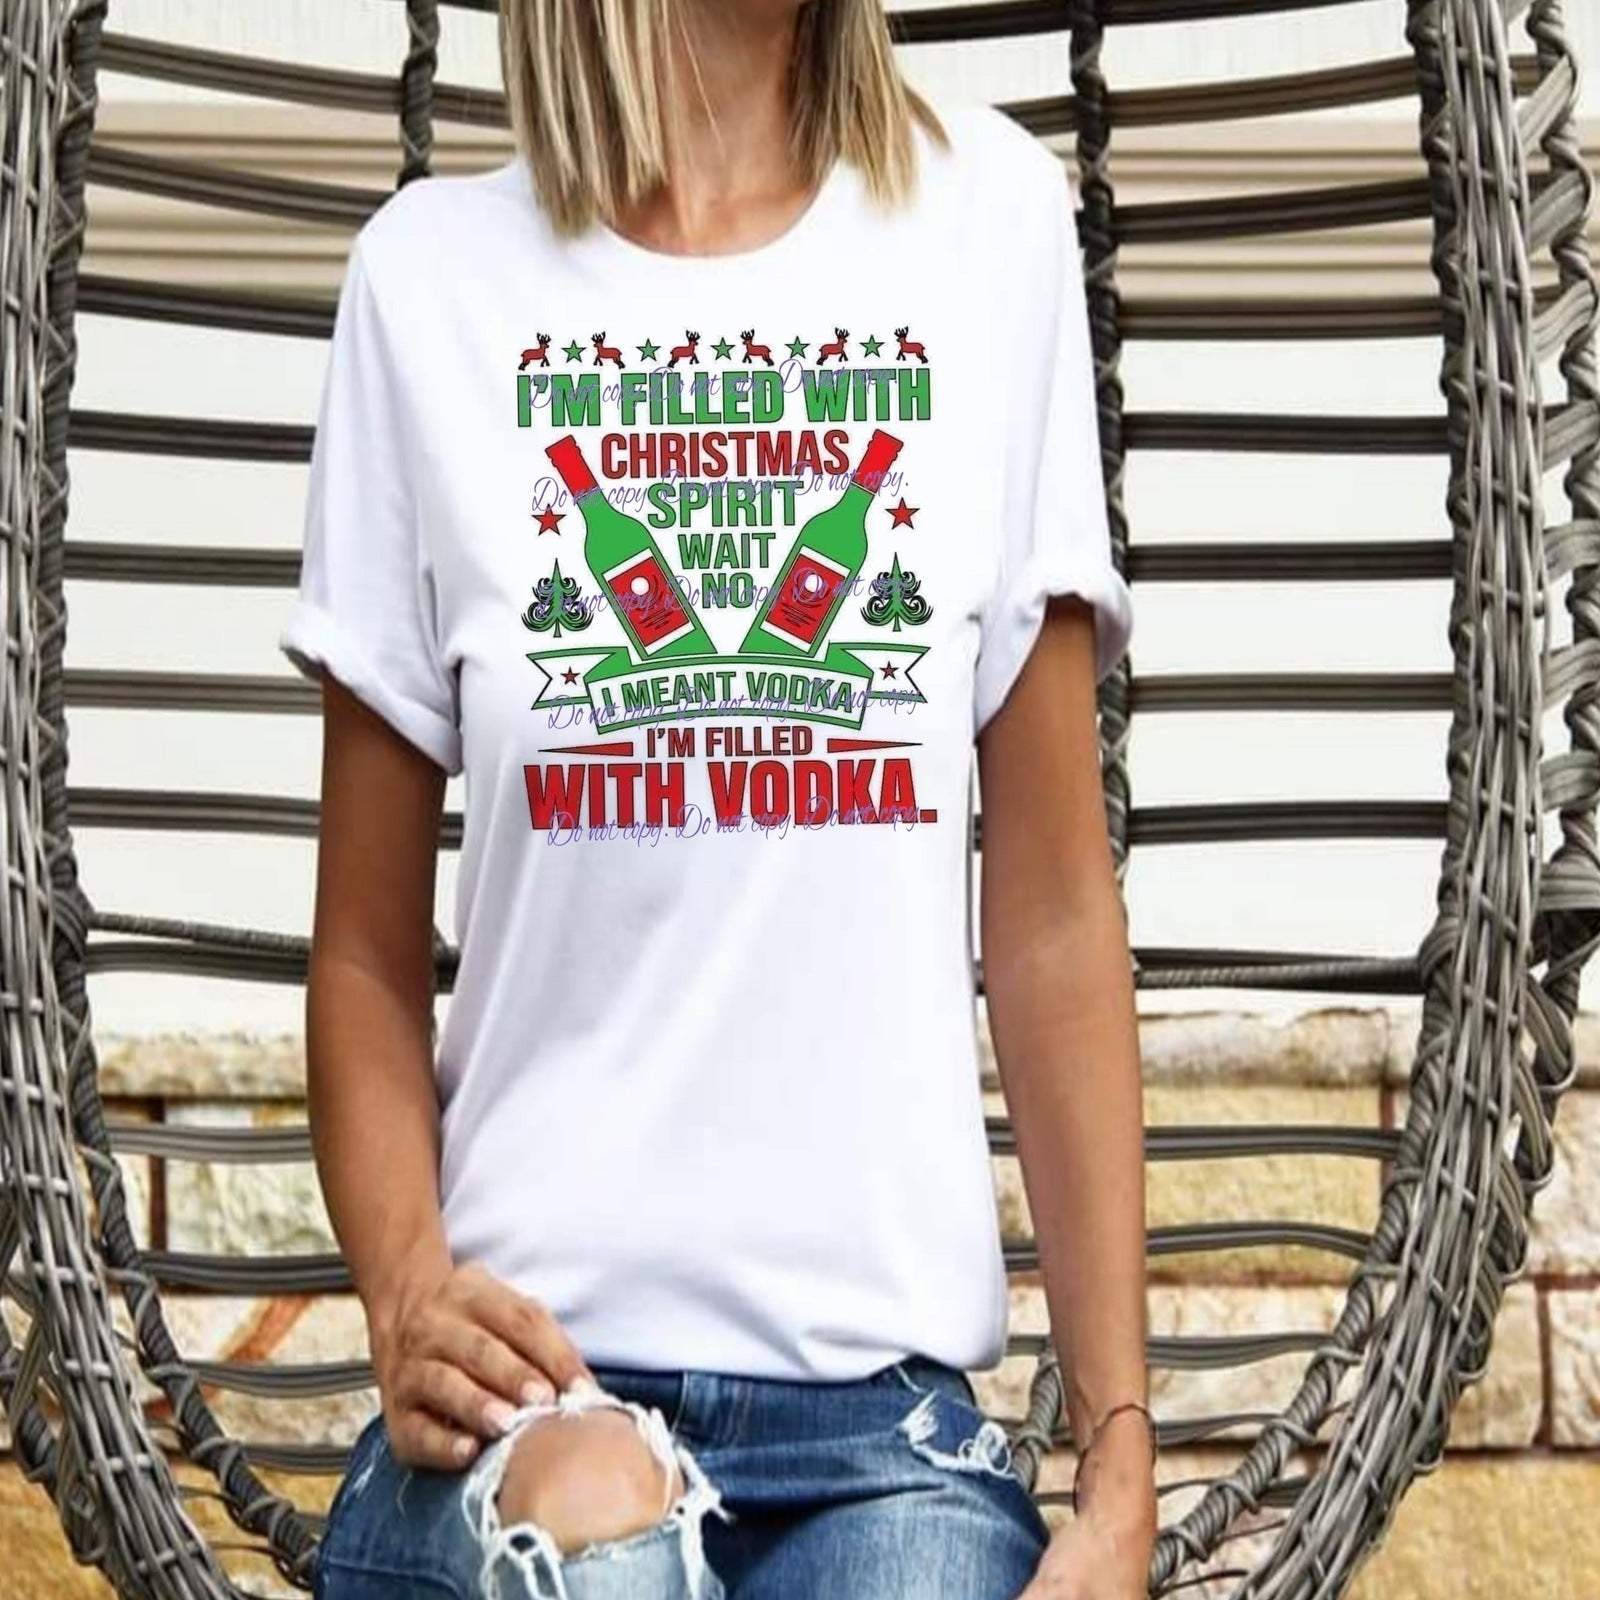 I'm Filled with the Christmas Spirit, I mean V I'm filled with V.odka T-Shirt Pink Christmas | Christmas Apparel Collection | Pink Innovations, LLC